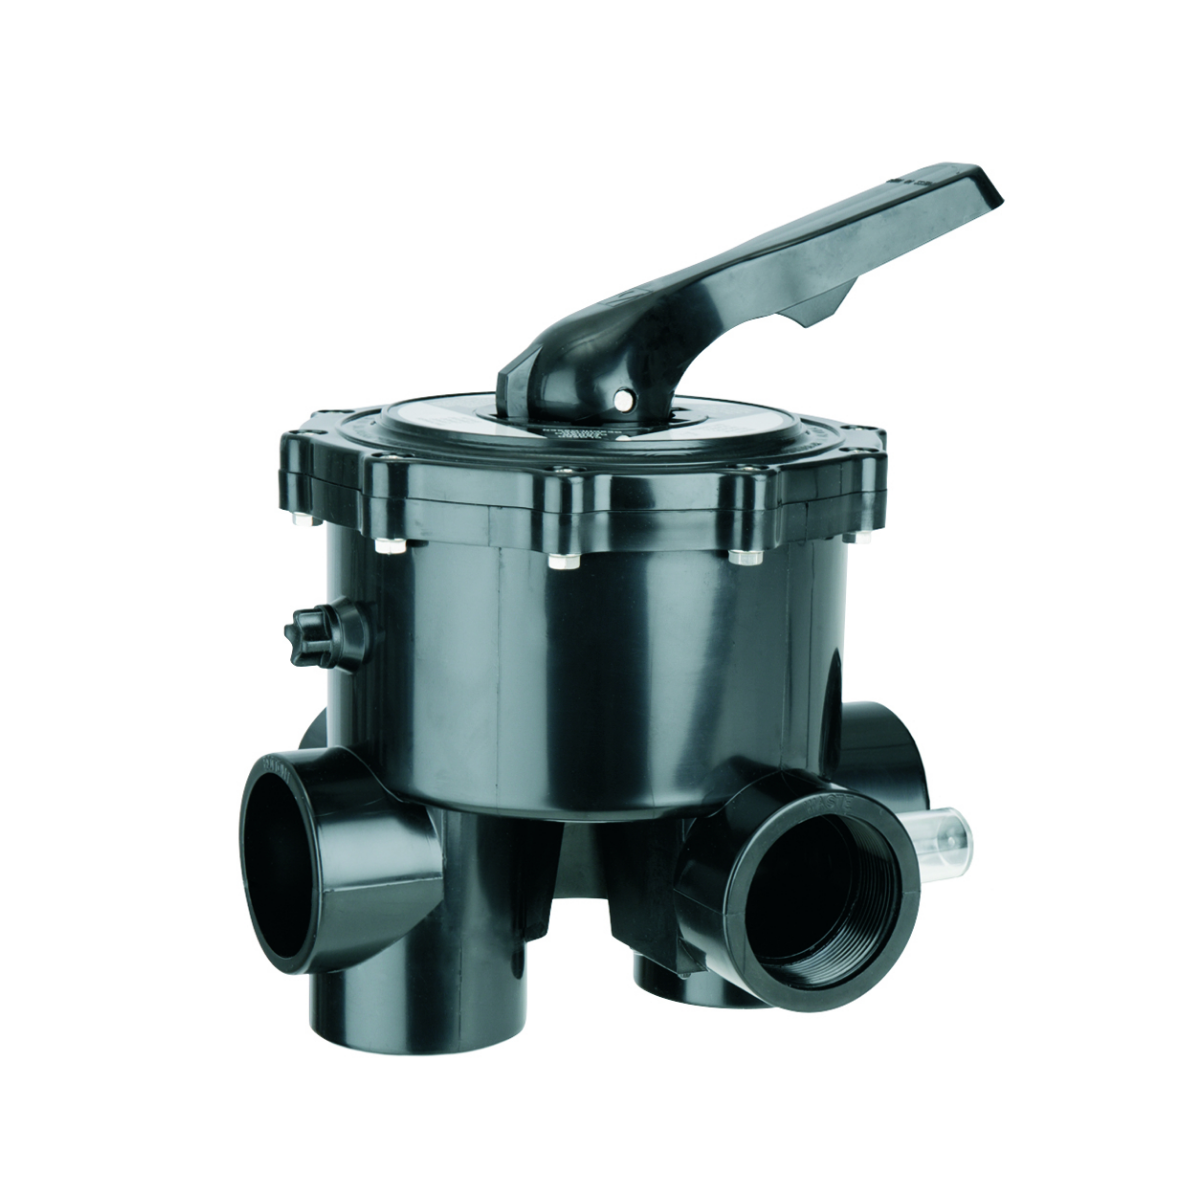 Selector Valve 1 1/2" and 2" Classic Astralpool